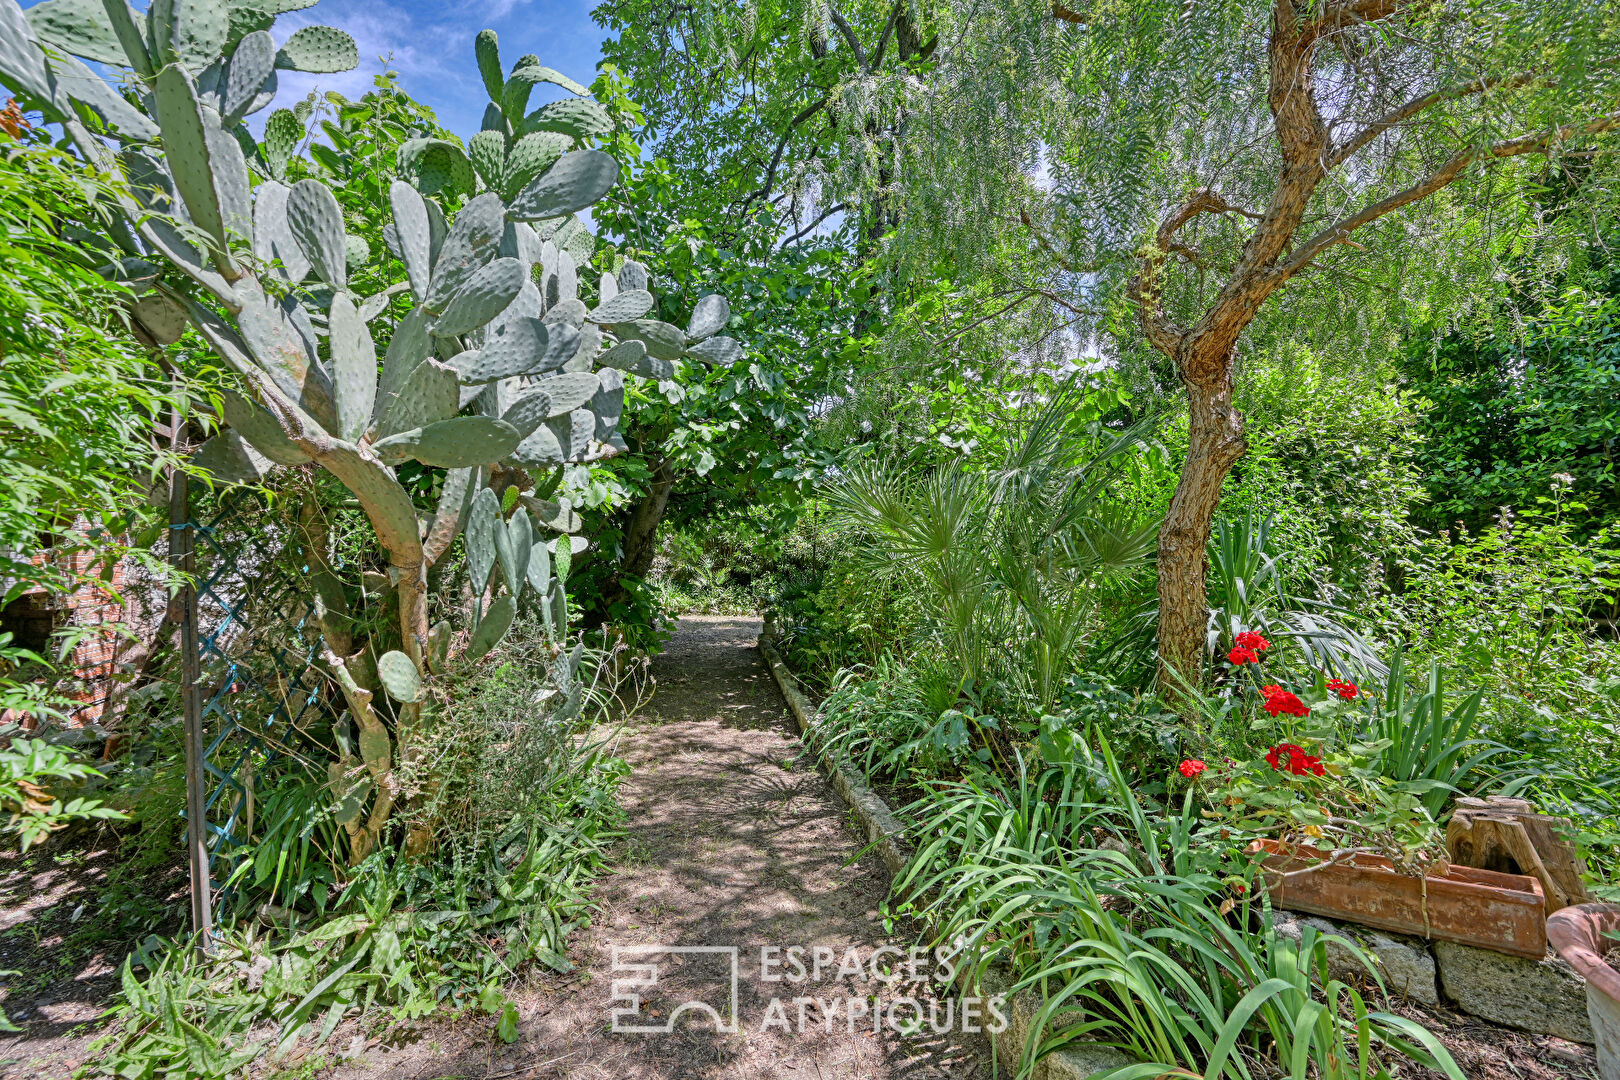 A garden in the city – Arceaux Montpellier district